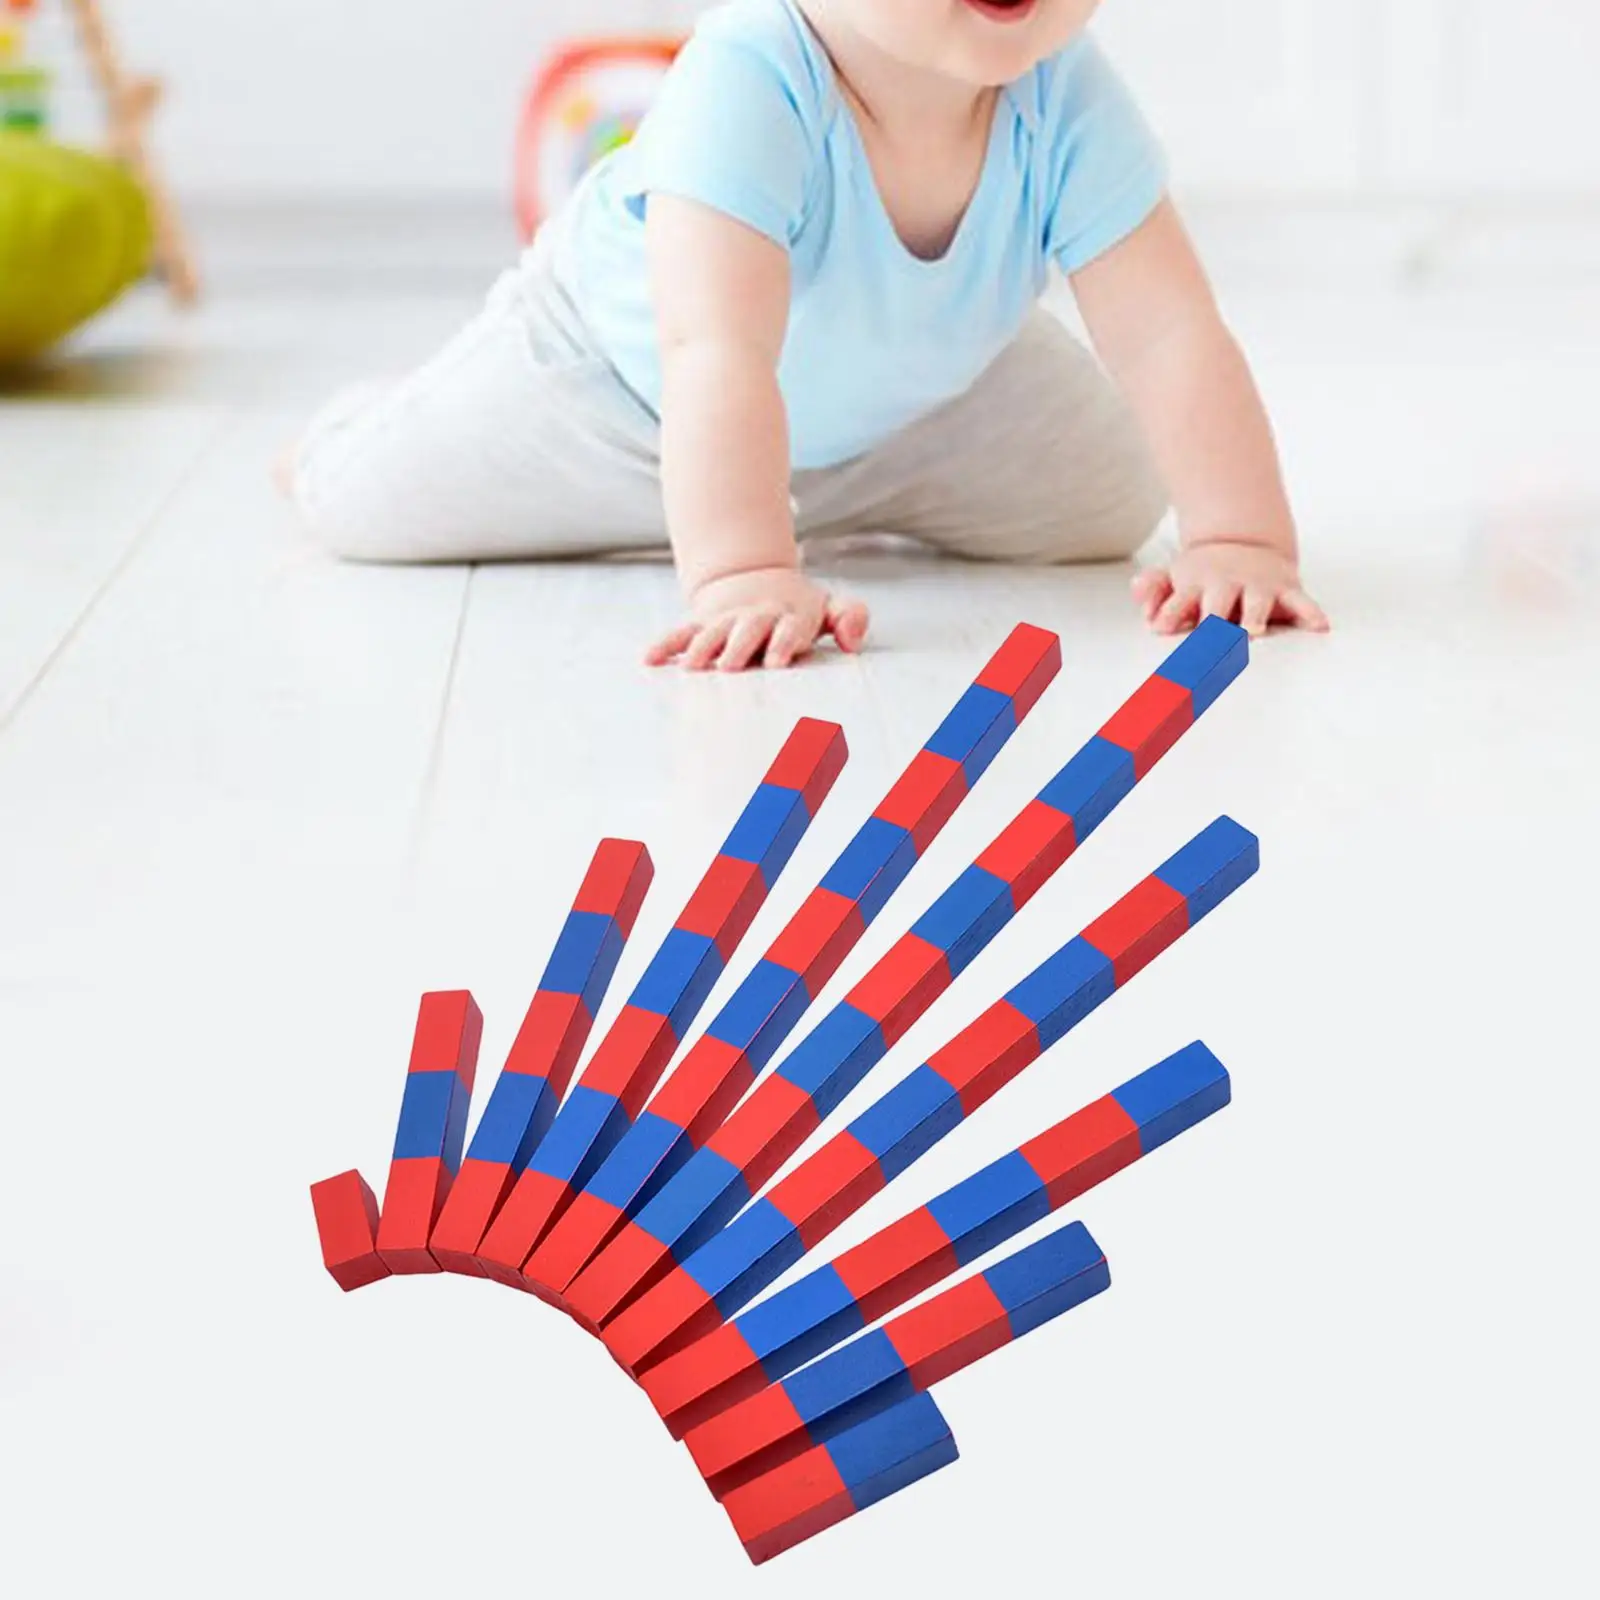 Wood Montessori Numerical Rods Count from 1 to 10 Numerical Educational Math Teaching Aids for Preschool Kindergarten Girls Boys